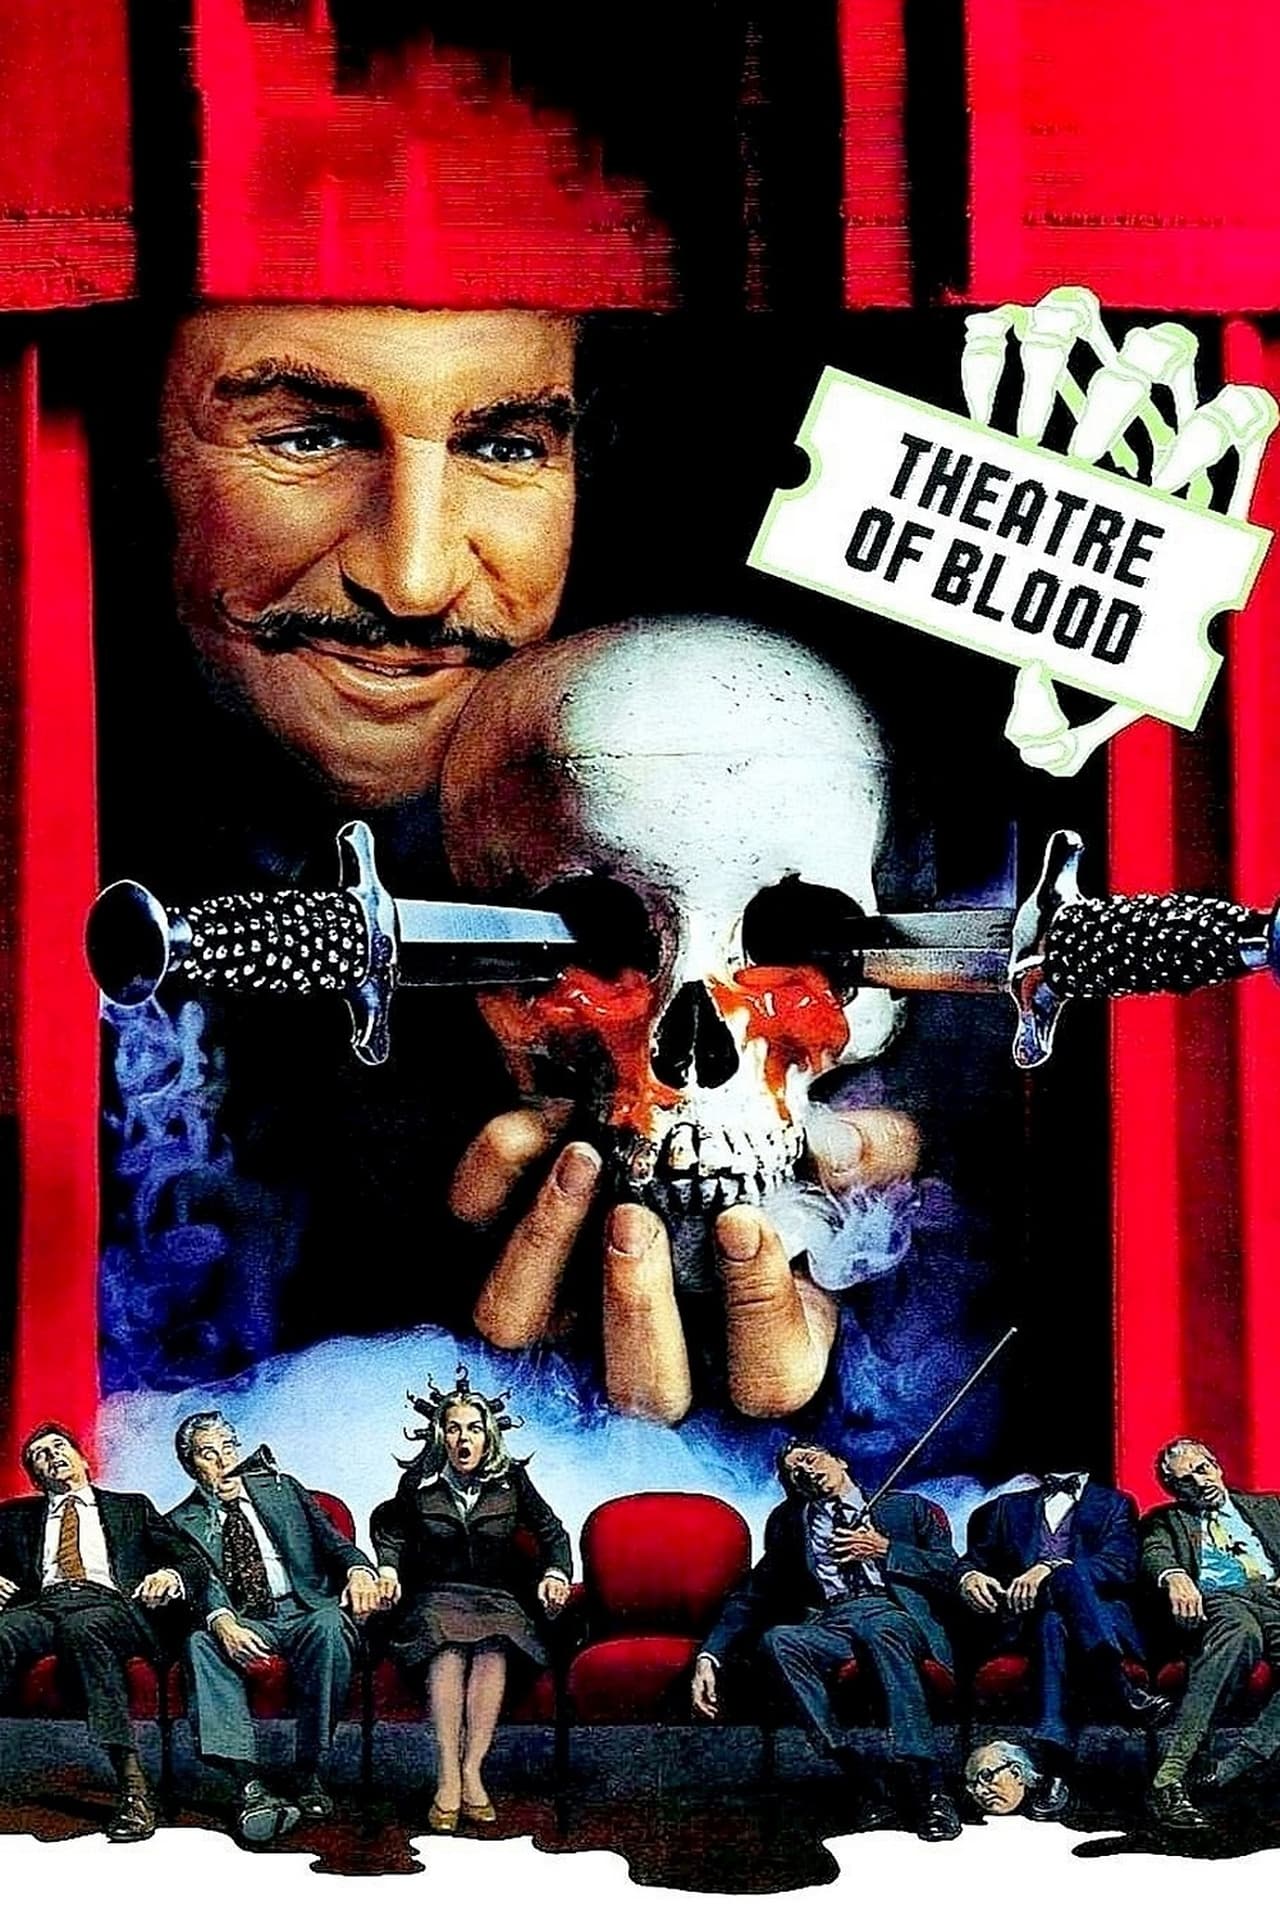 Theatre of Blood poster